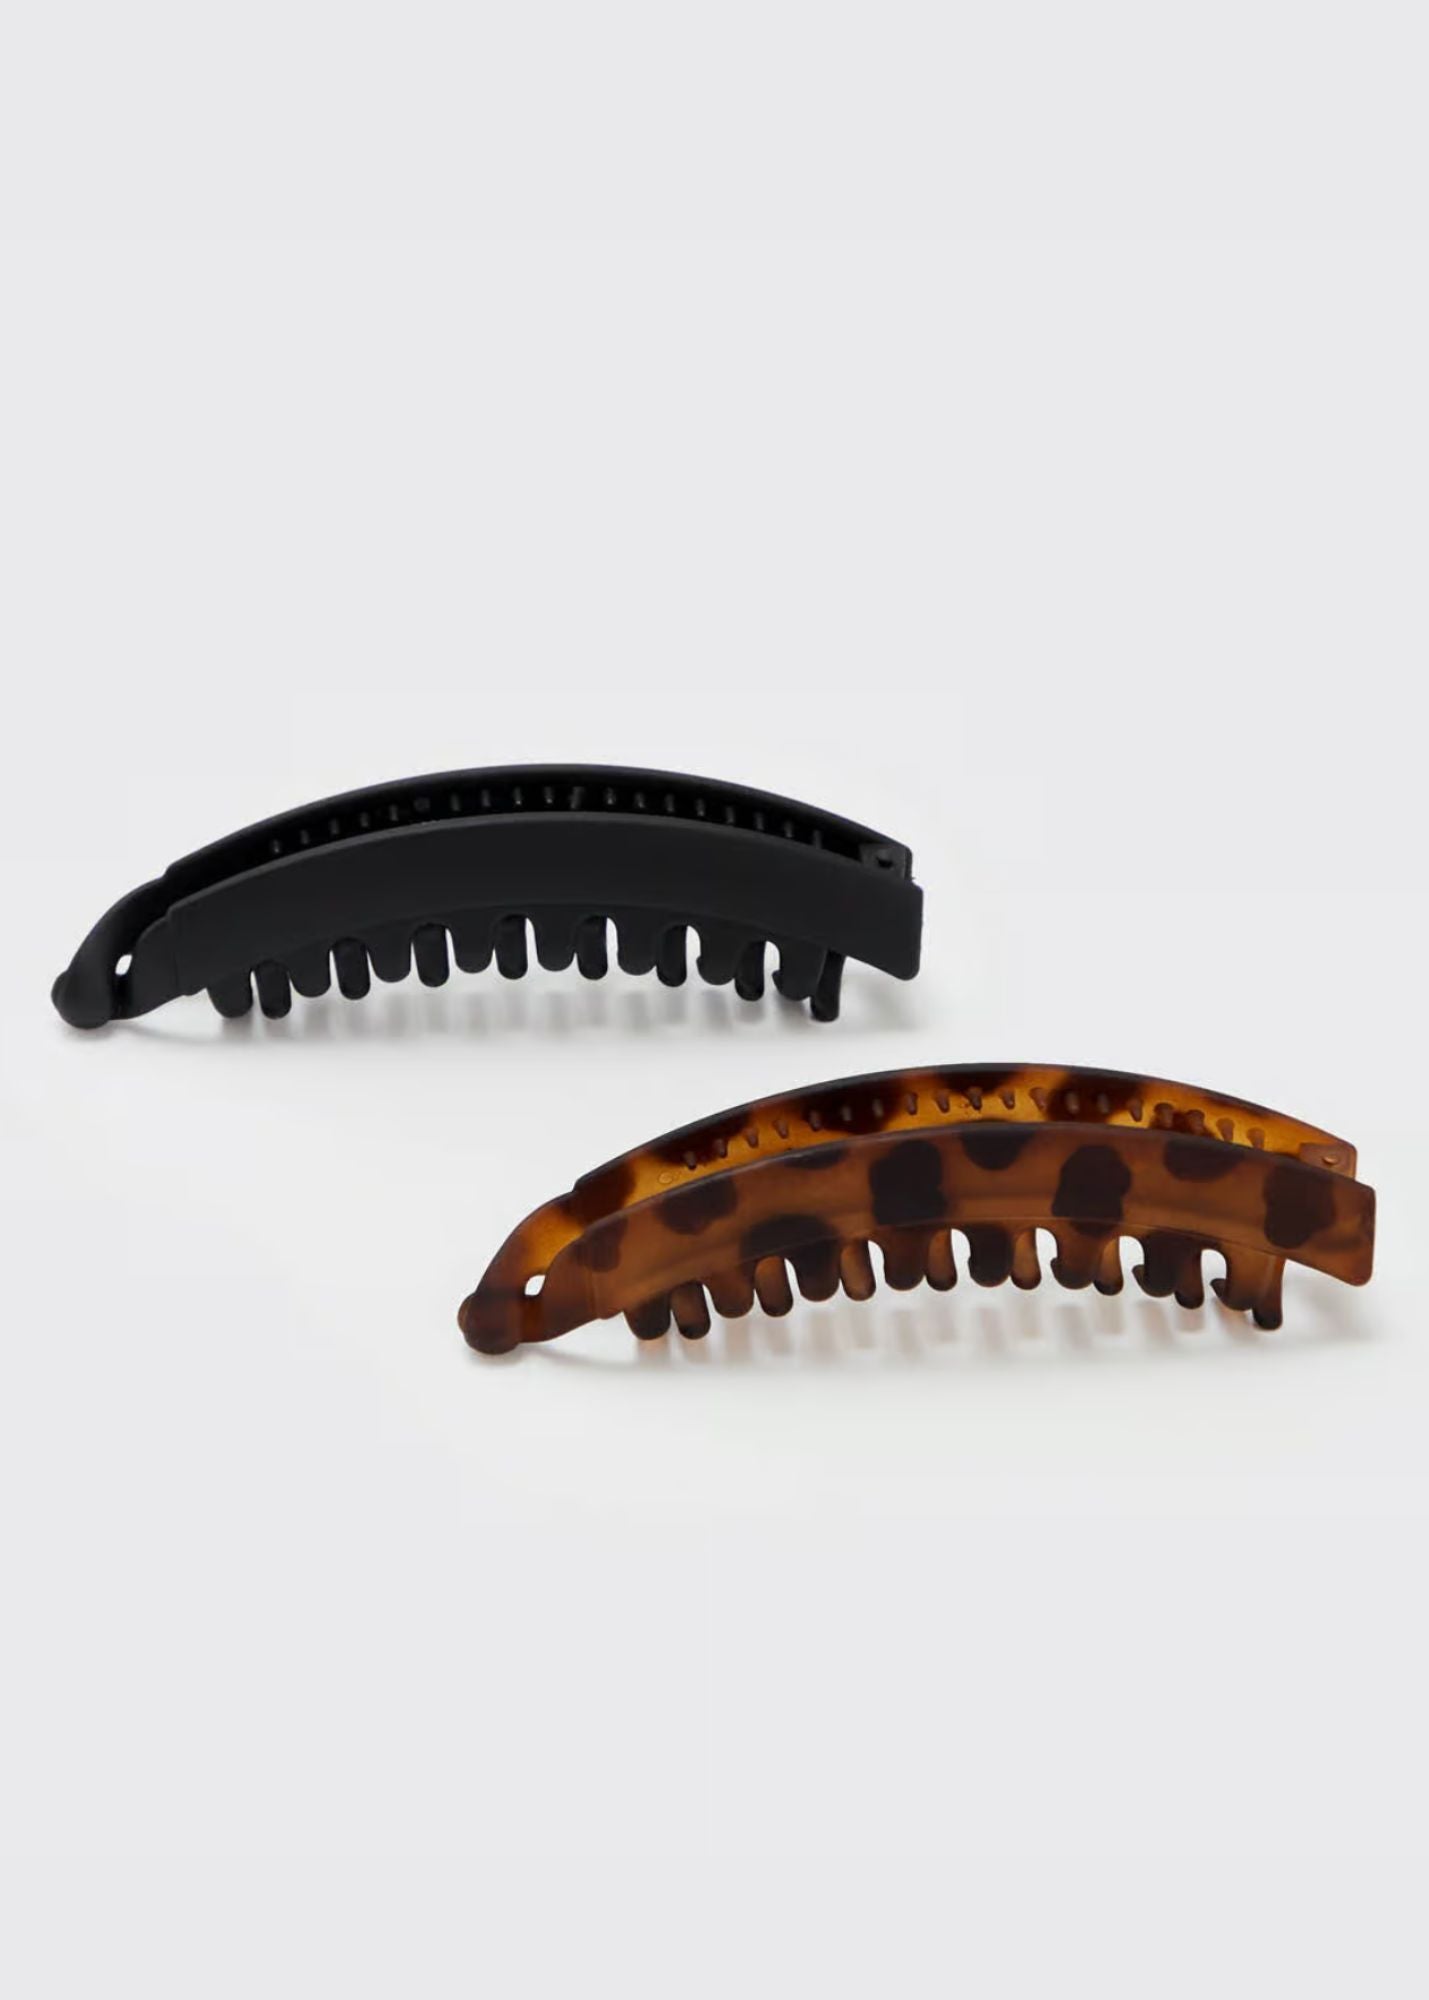 Banana Clips 2pc Set Accessories